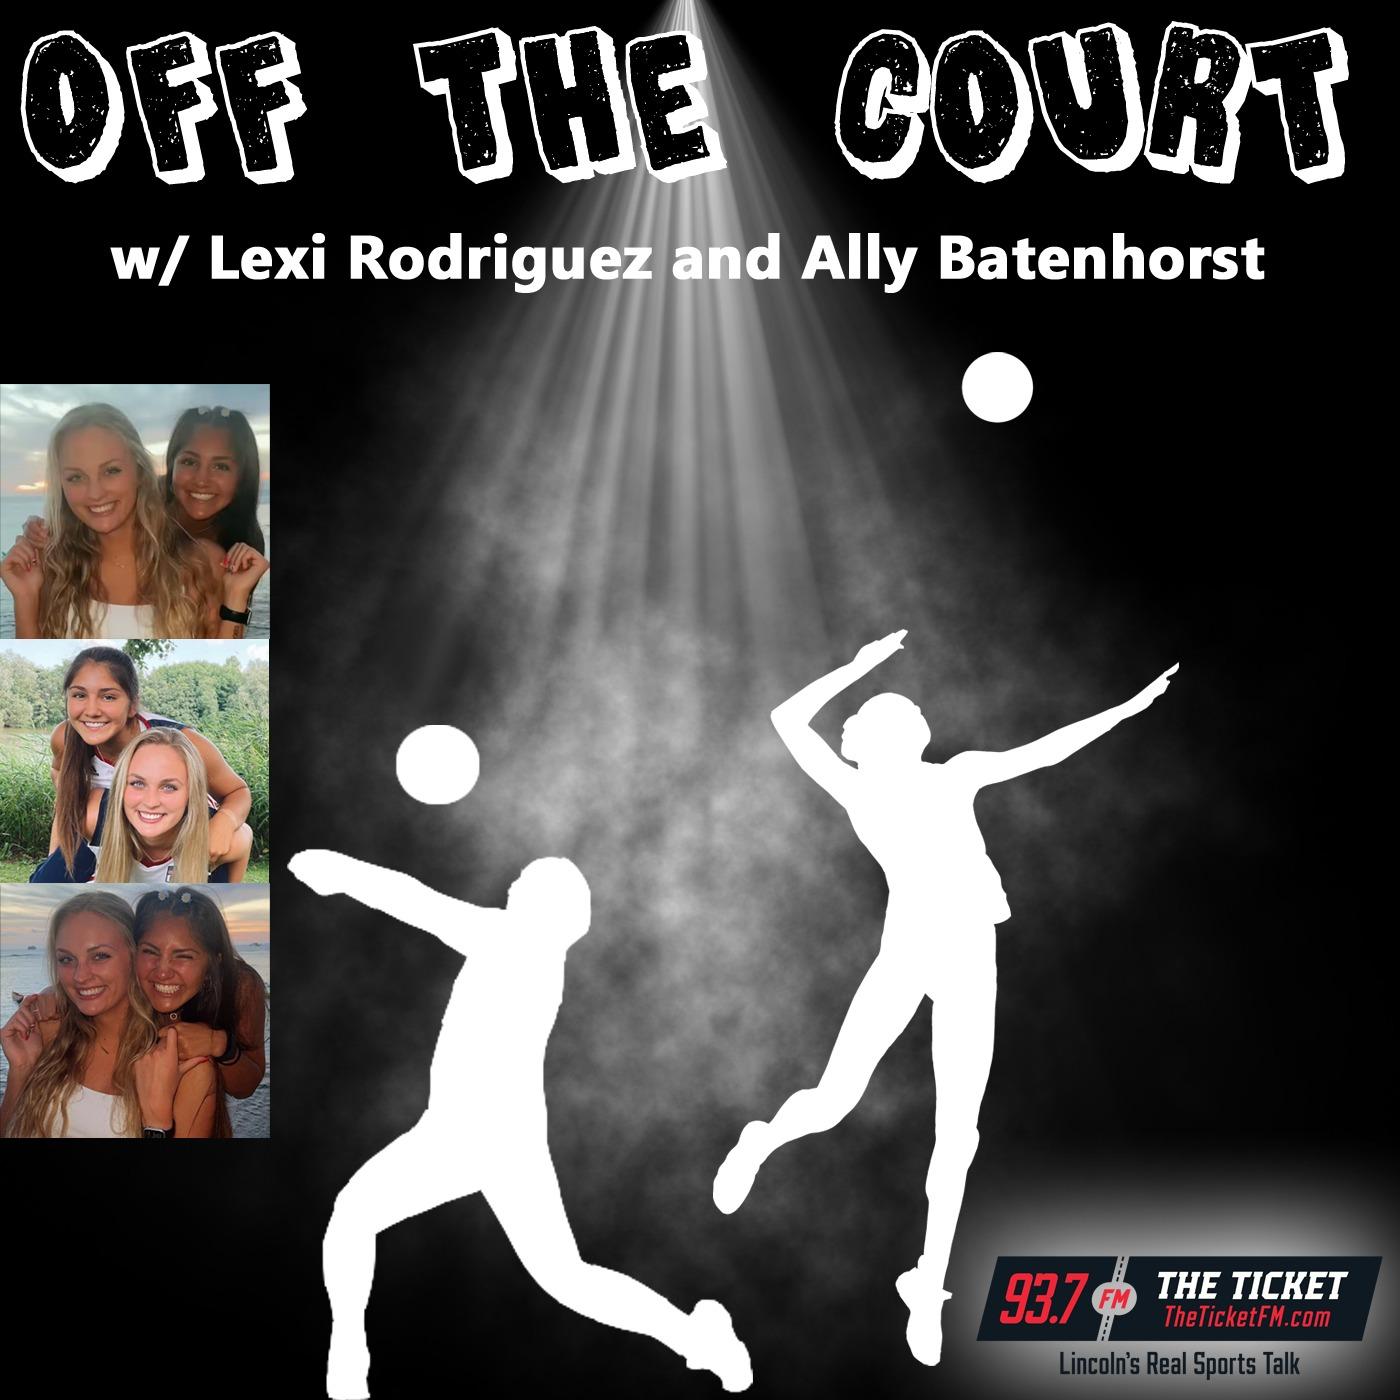 Off the Court w/ Lexi Rodriguez and Ally Batenhorst